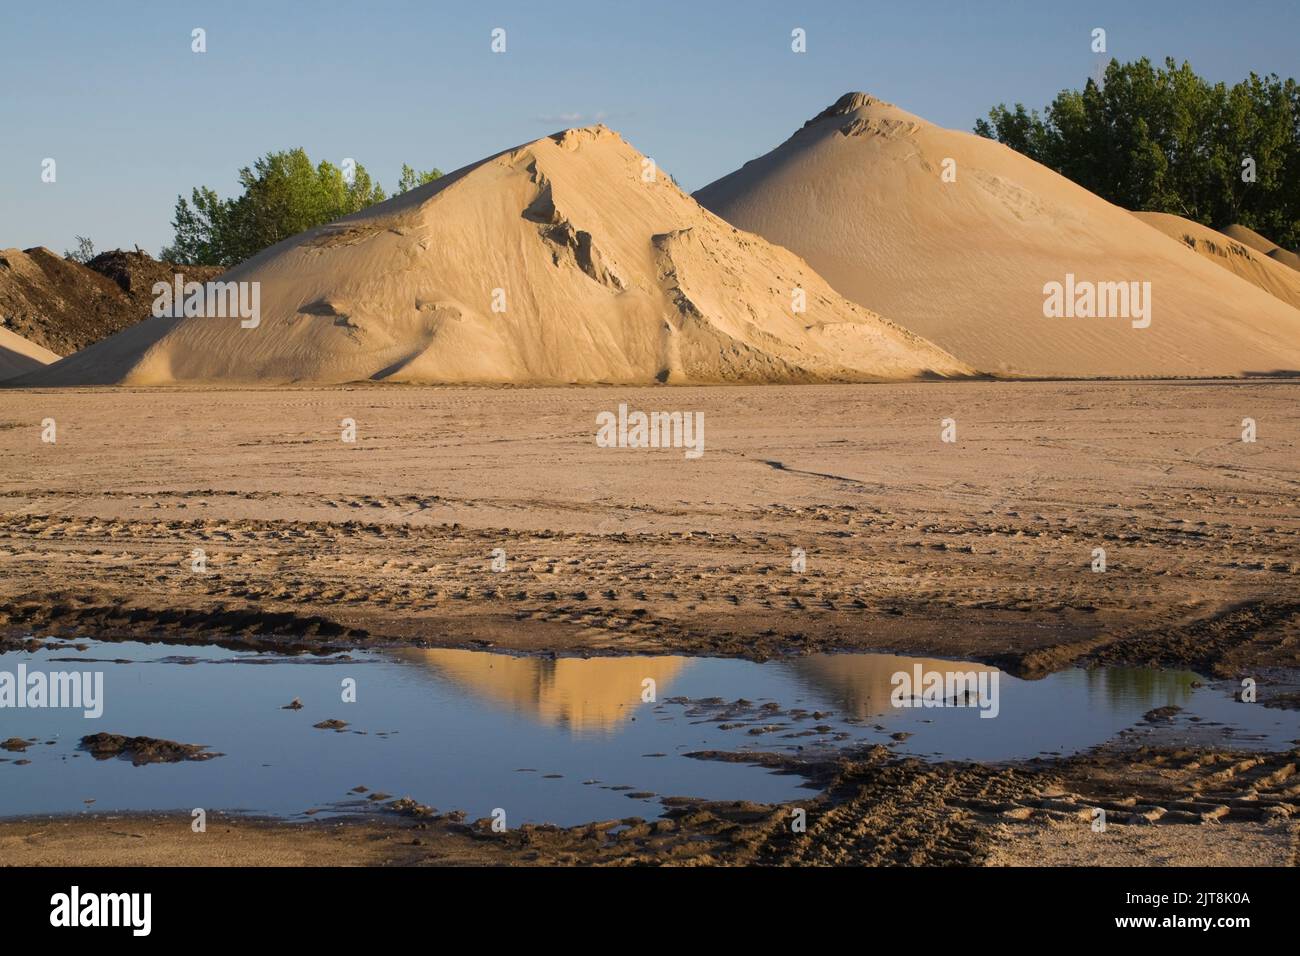 Mounds of tan colored sand and heavy tire tracks in a commercial sandpit after a heavy rainfall. Stock Photo